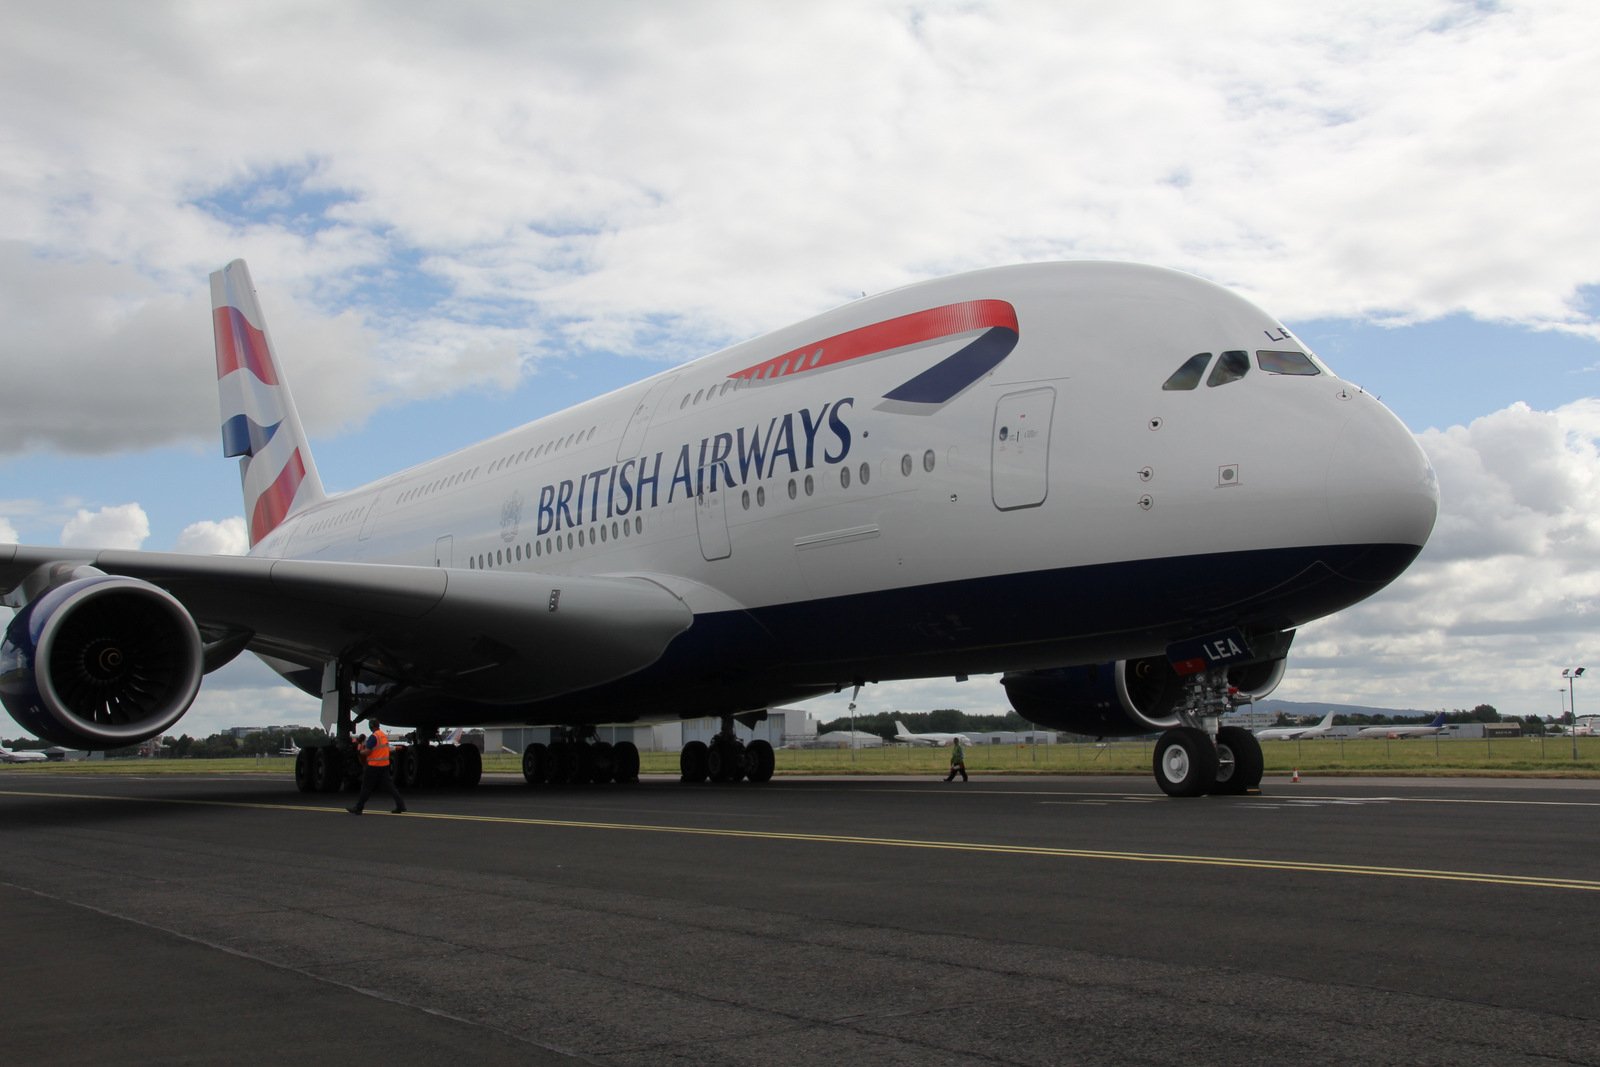 British Airways grounded plane against a blue and cloudy sky